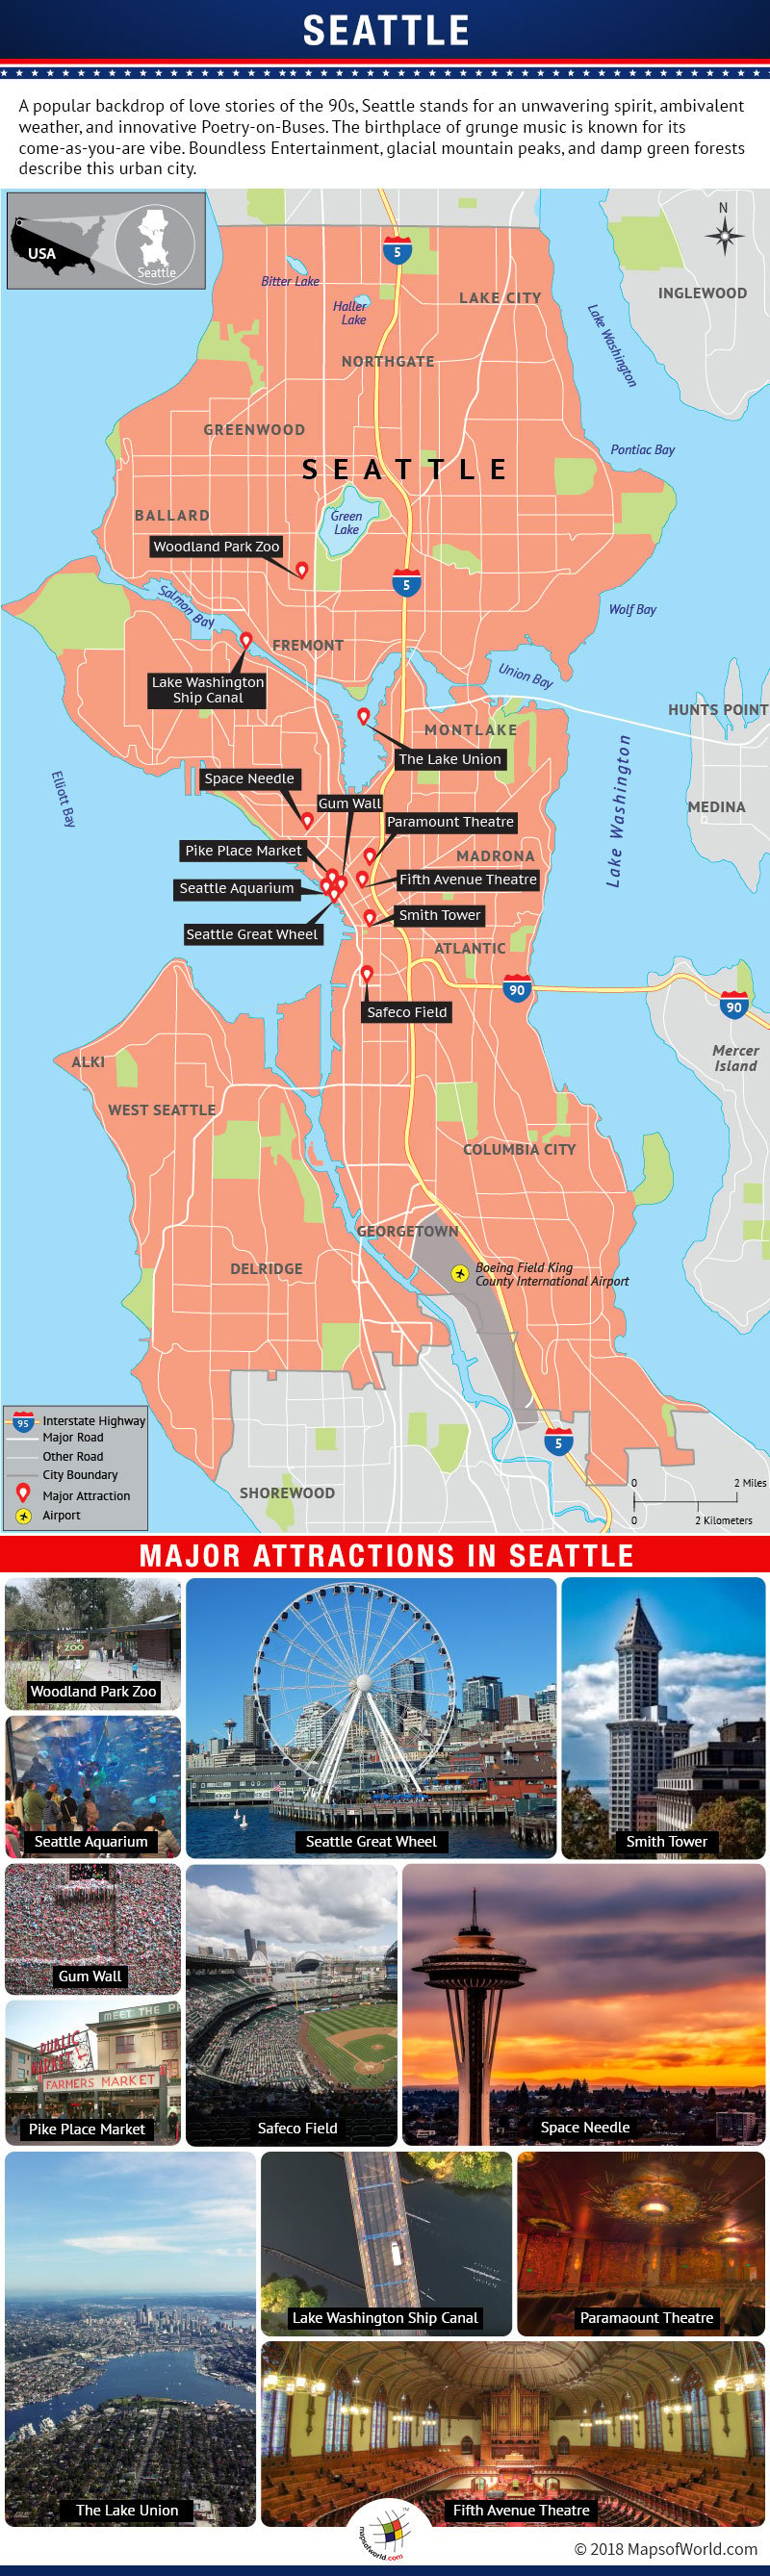 Infographic Depicting Seattle's Tourist Attractions